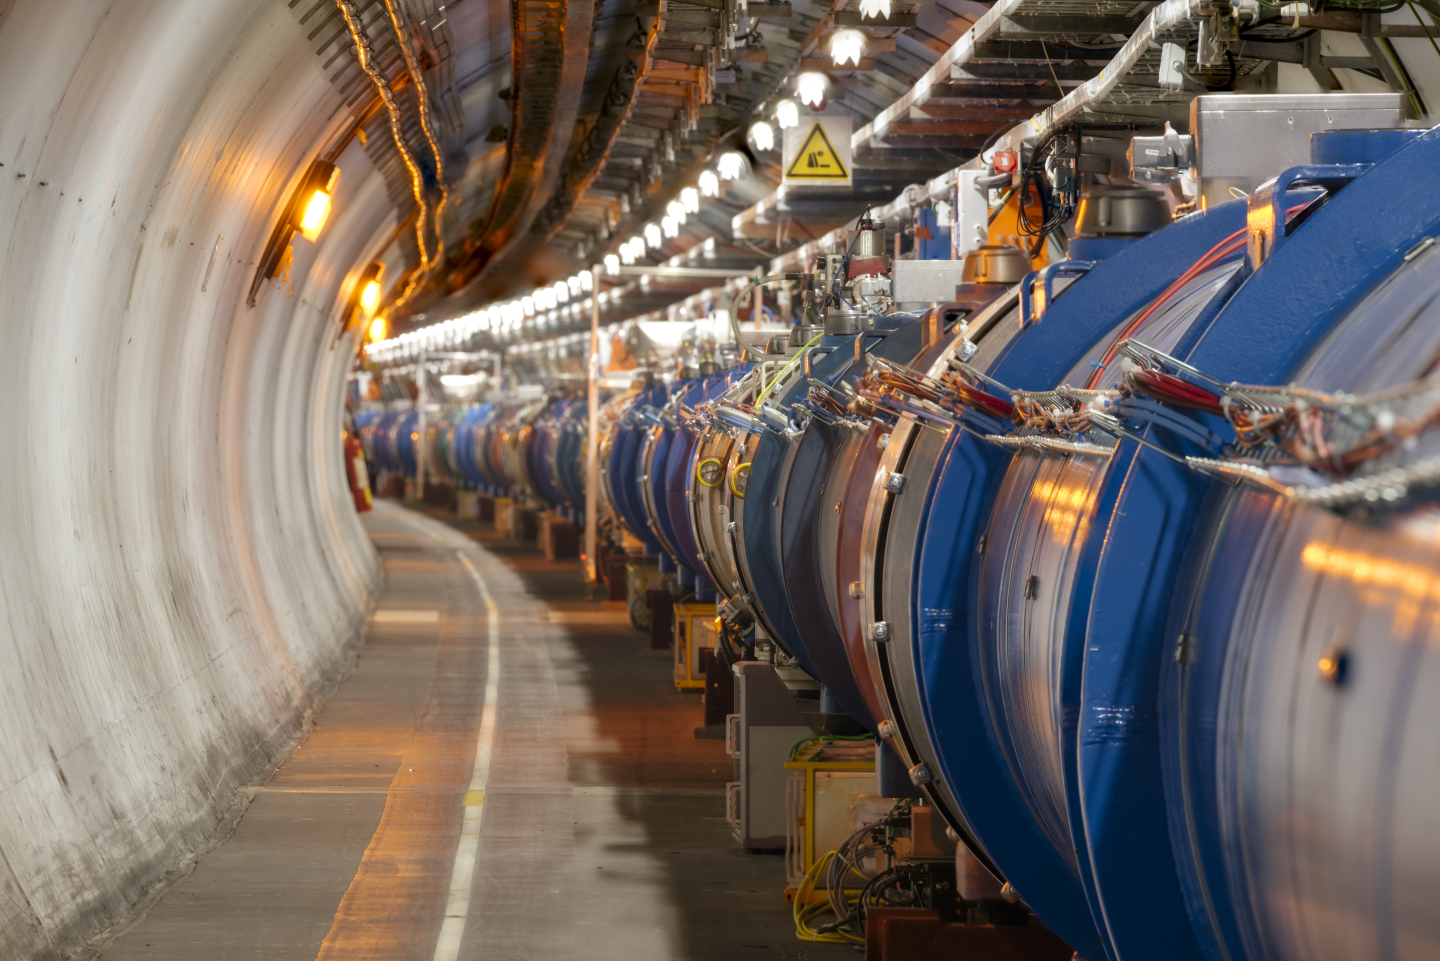 What happened while the LHC slept over winter?